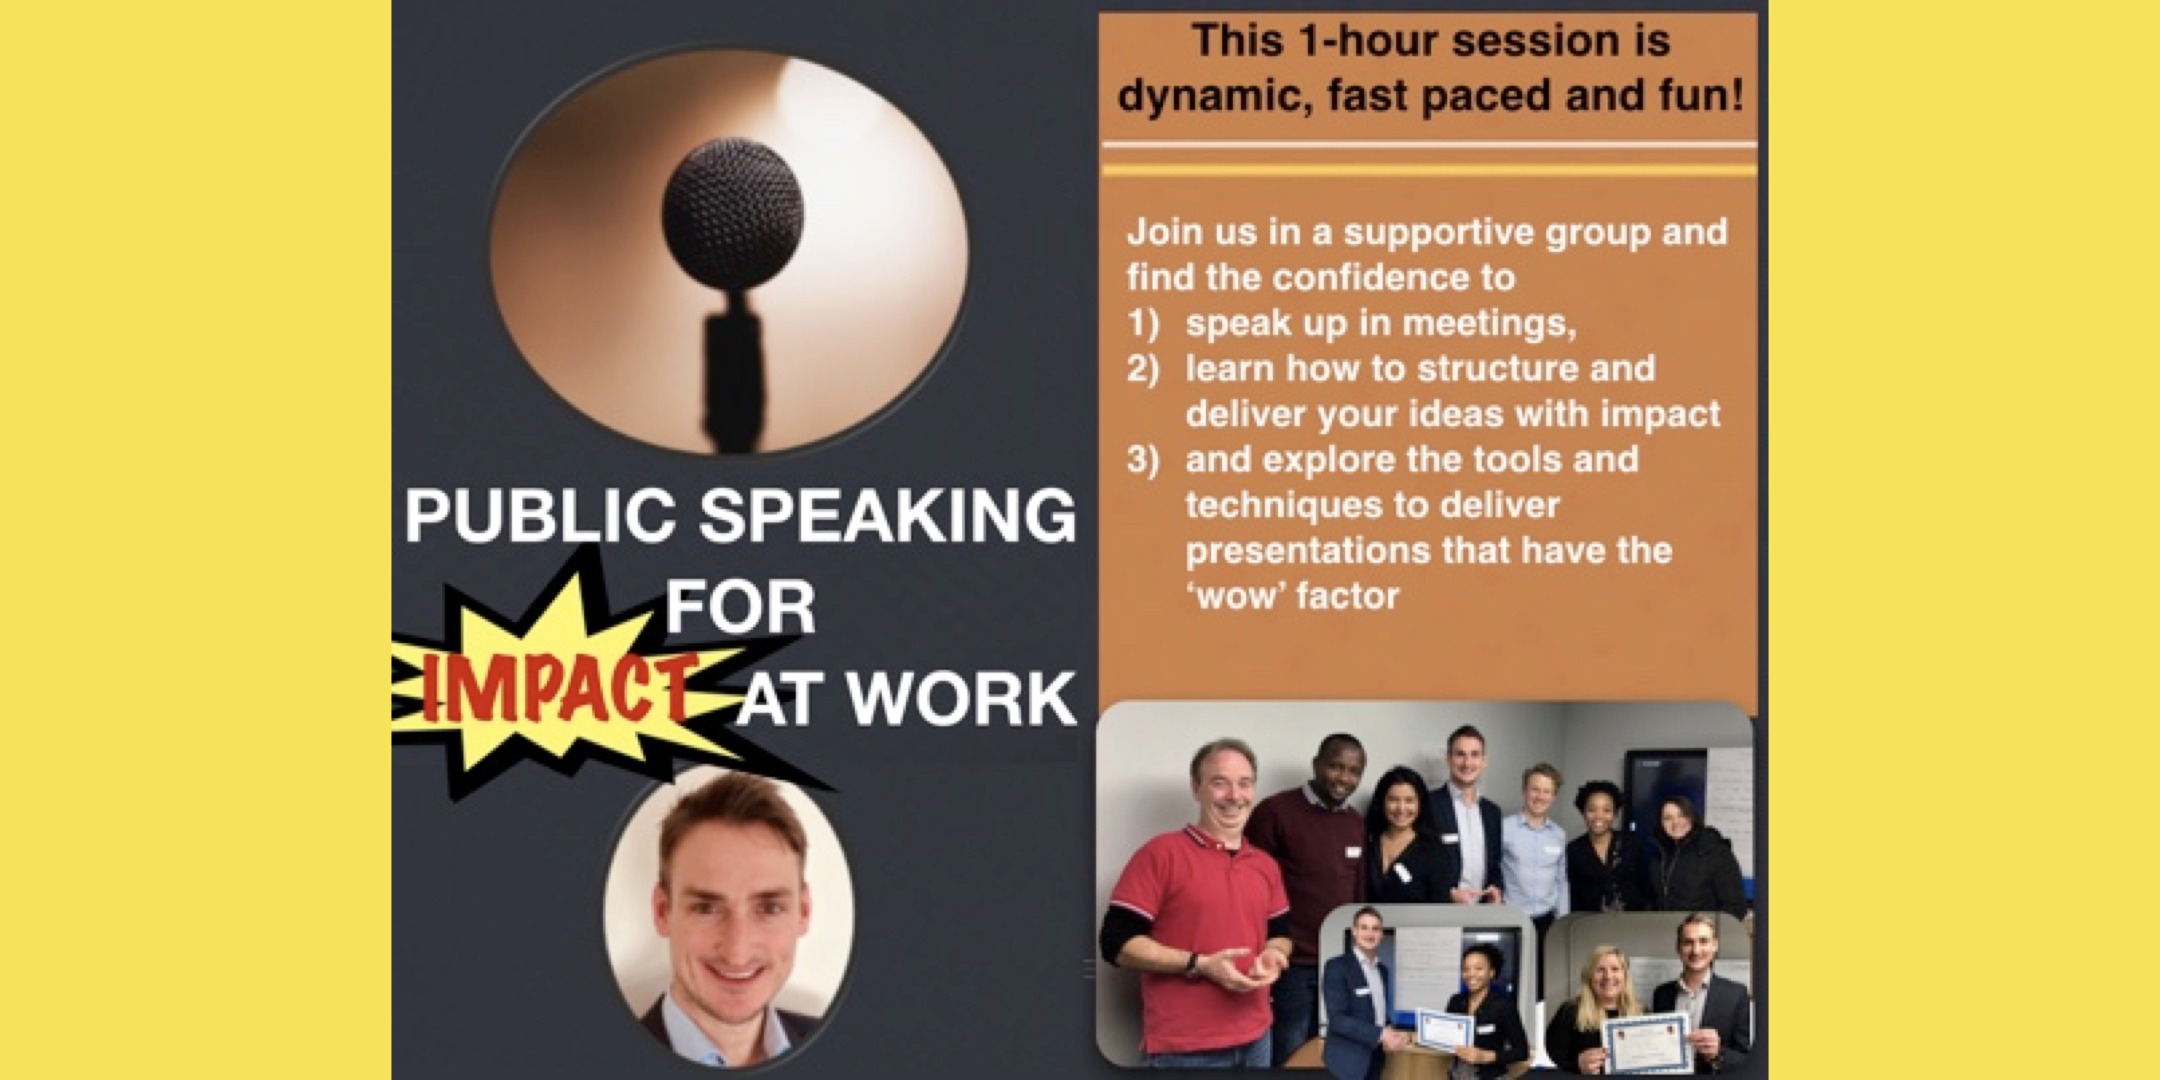 Public speaking for impact at work